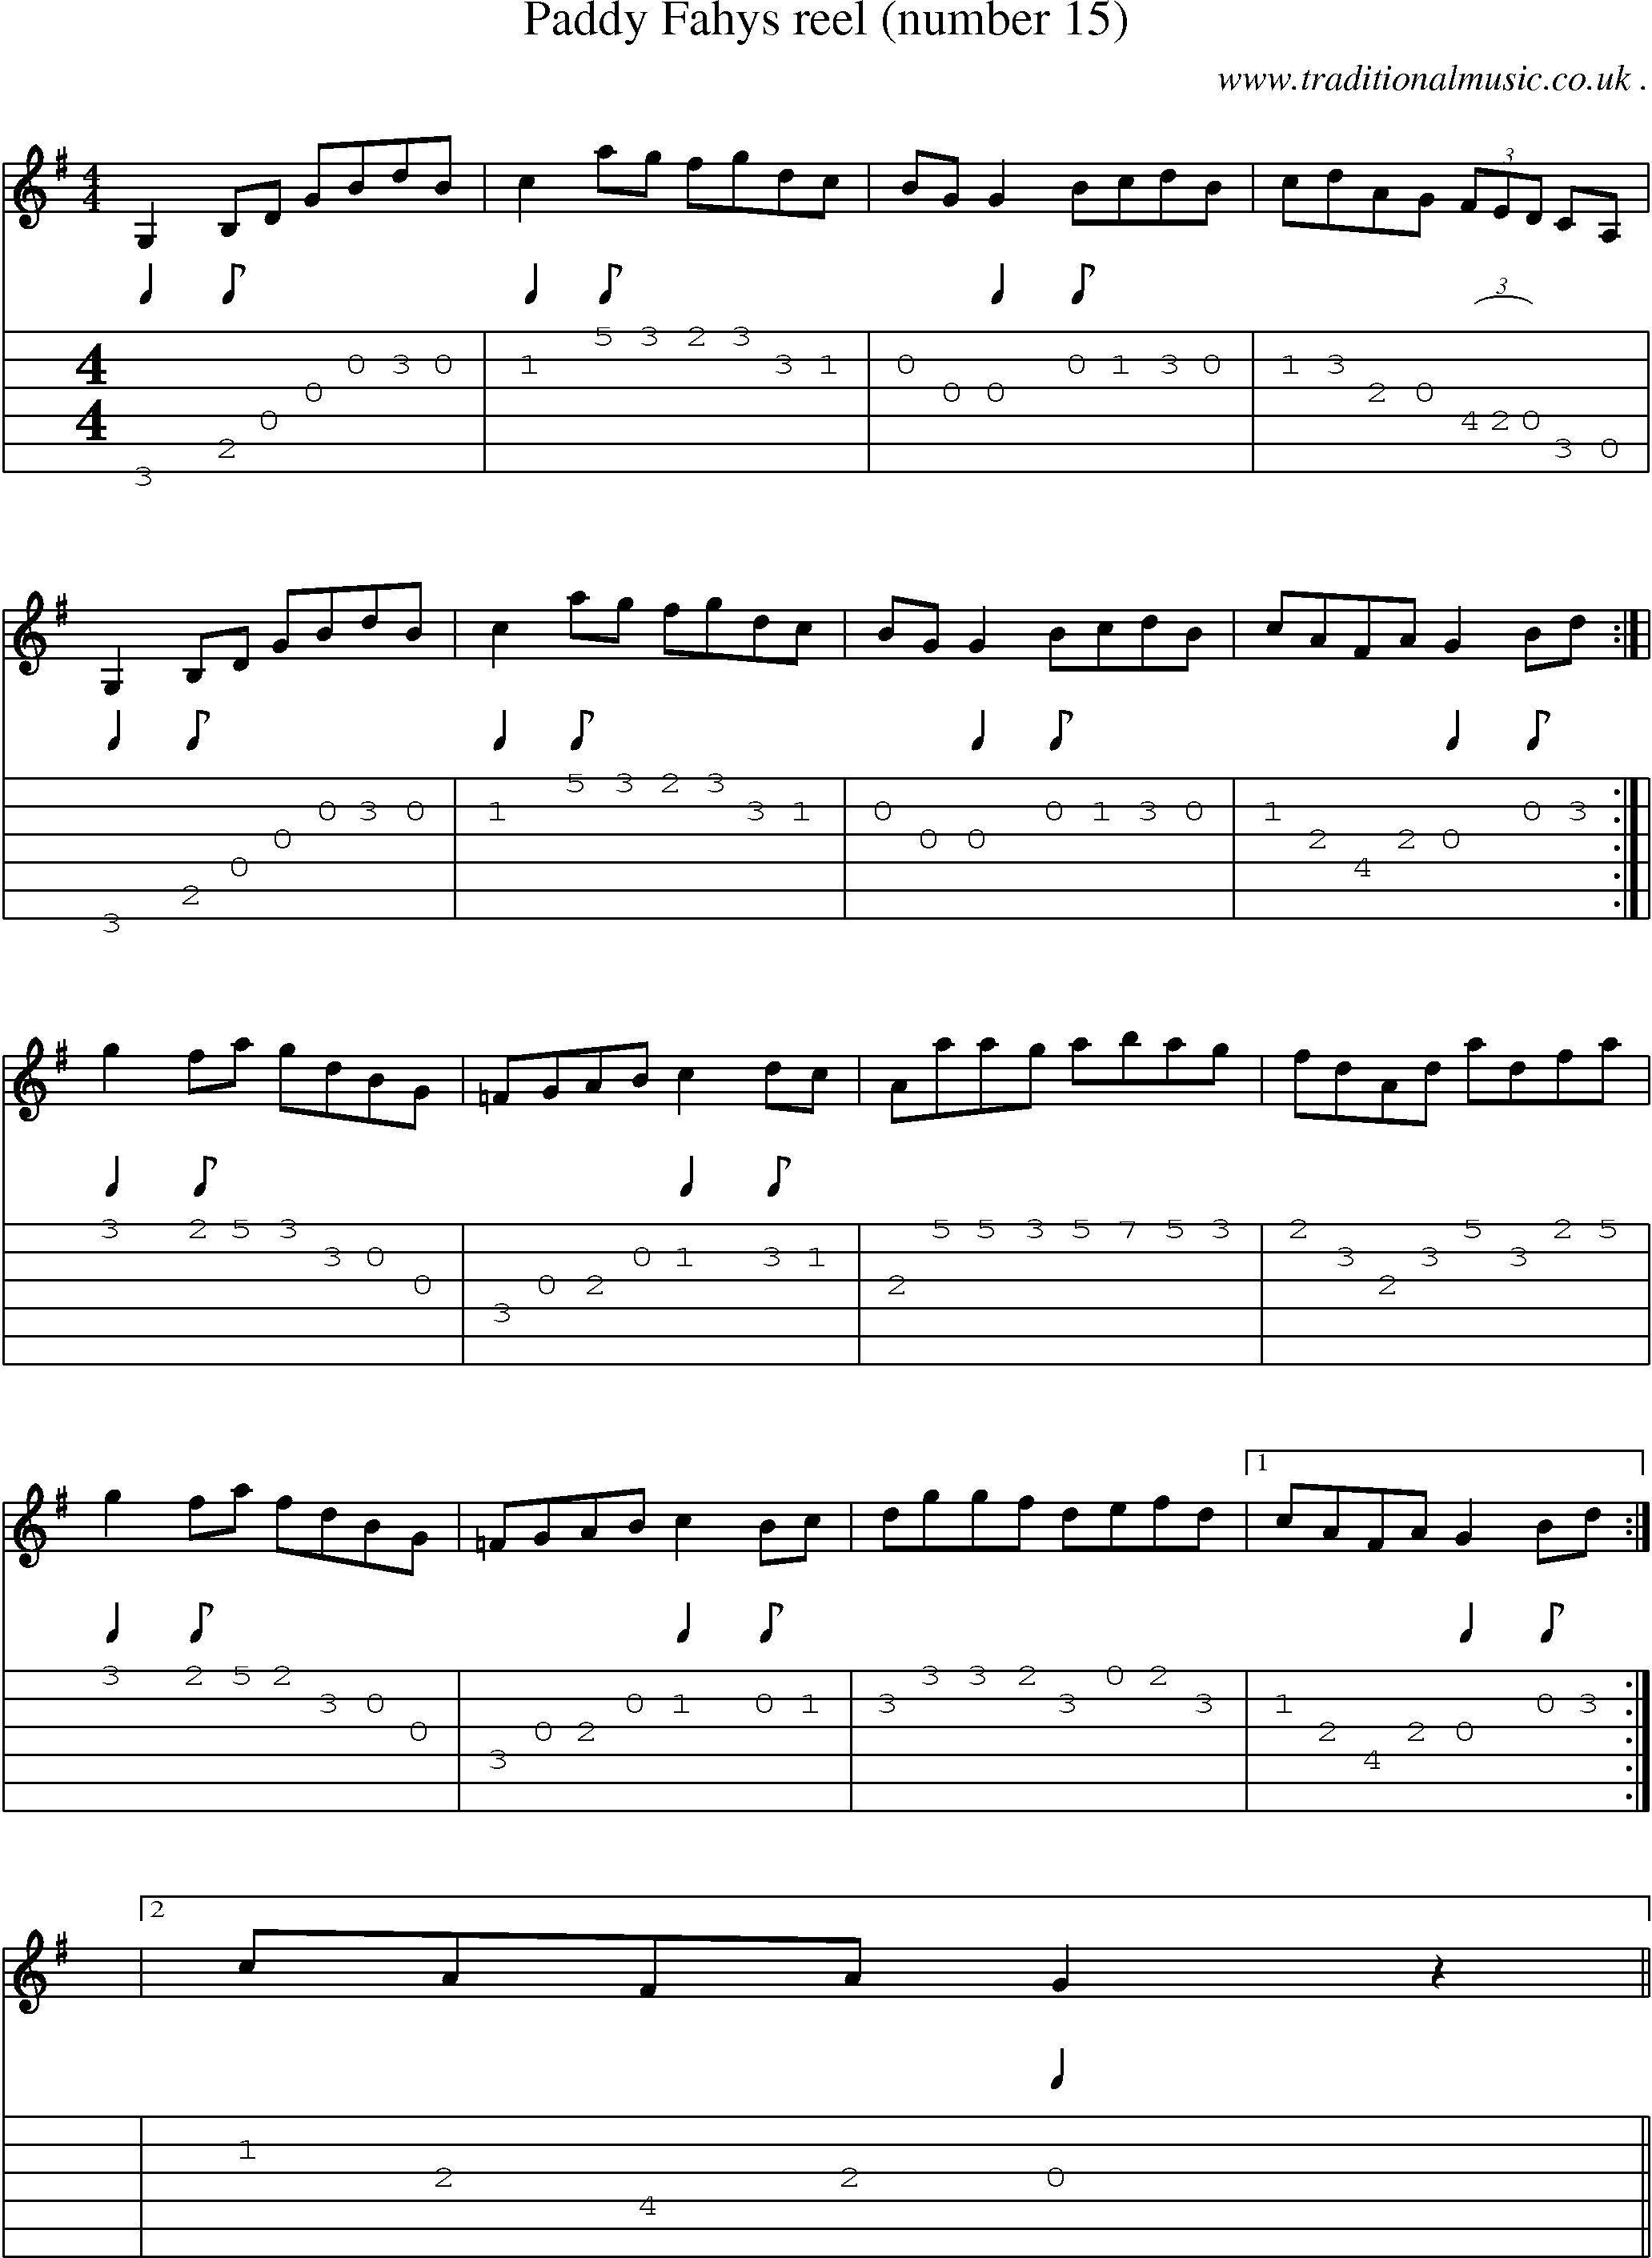 Sheet-Music and Guitar Tabs for Paddy Fahys Reel (number 15)